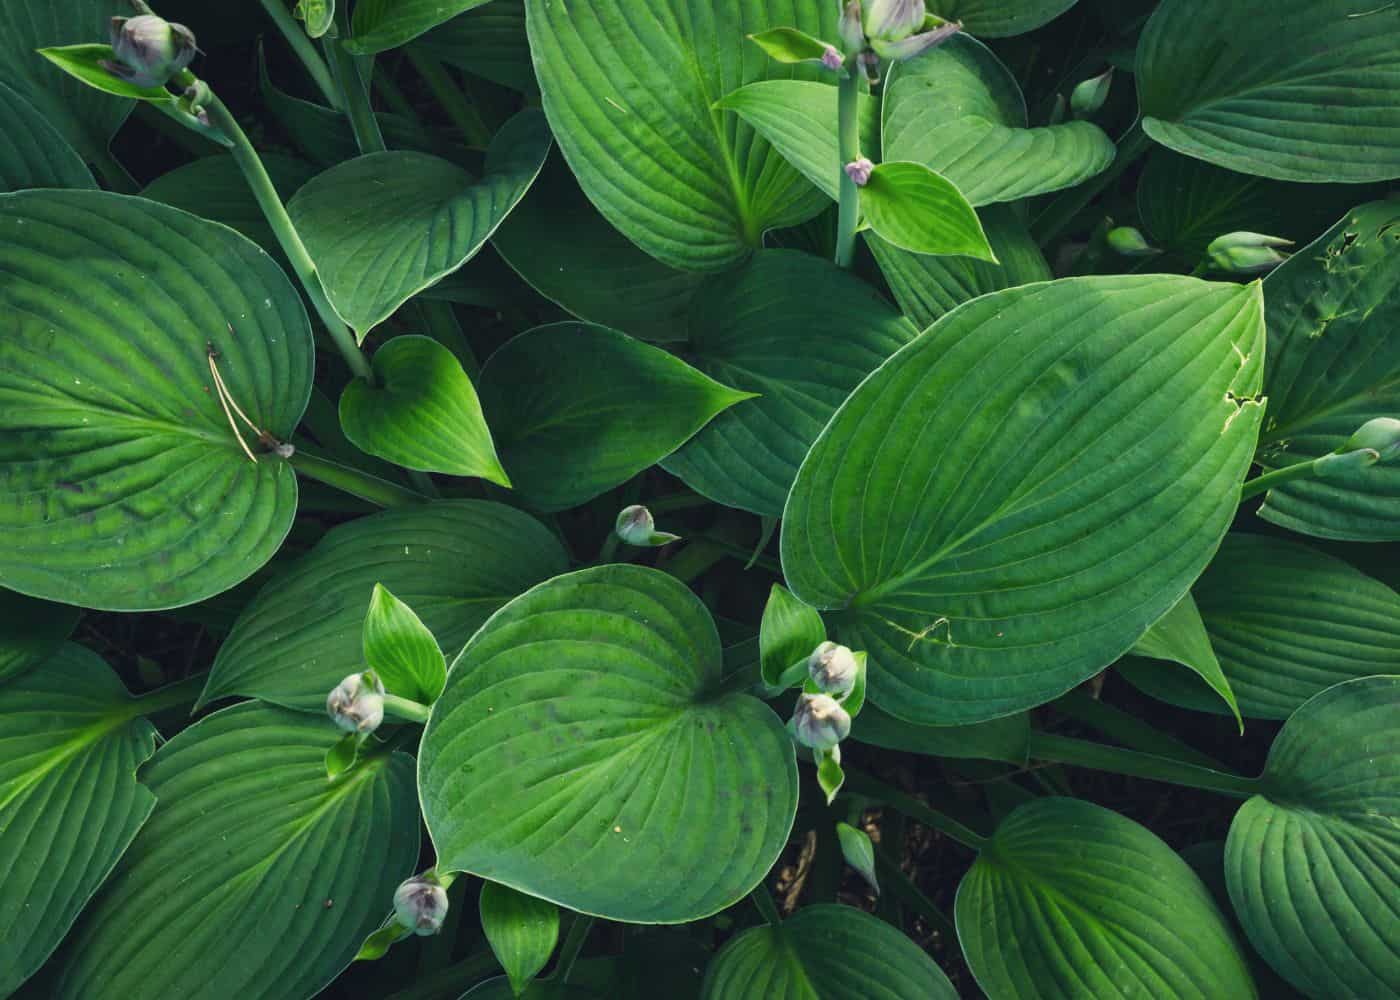 Hosta foliage - solid green with flower buds